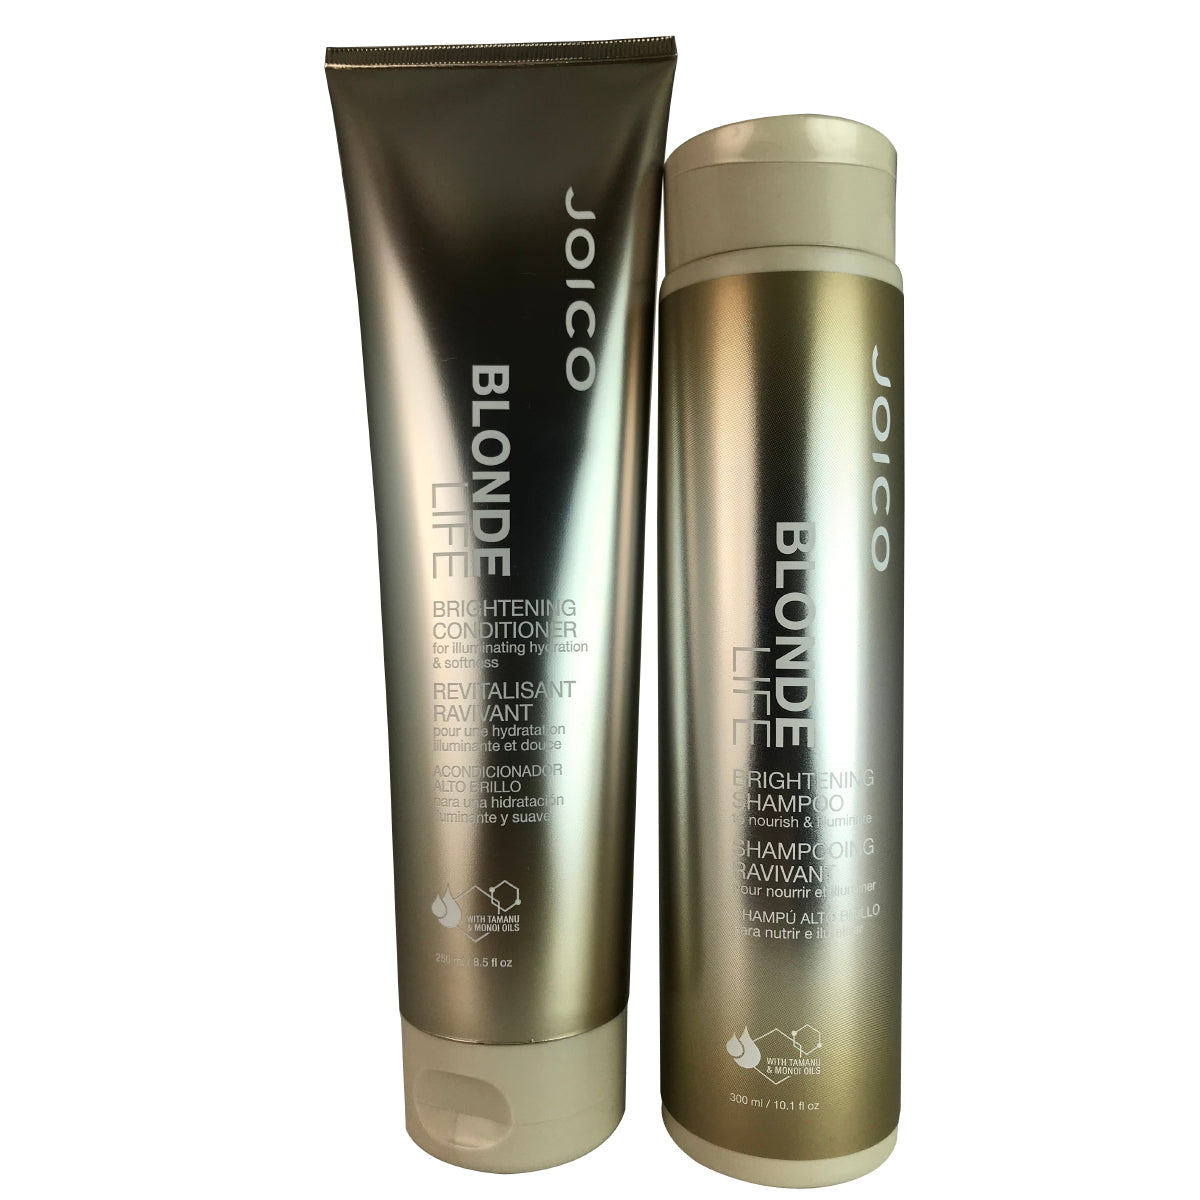 Joico Blonde Life Brightening Hair Shampoo and Conditioner Duo 10.1 oz/8.5 oz